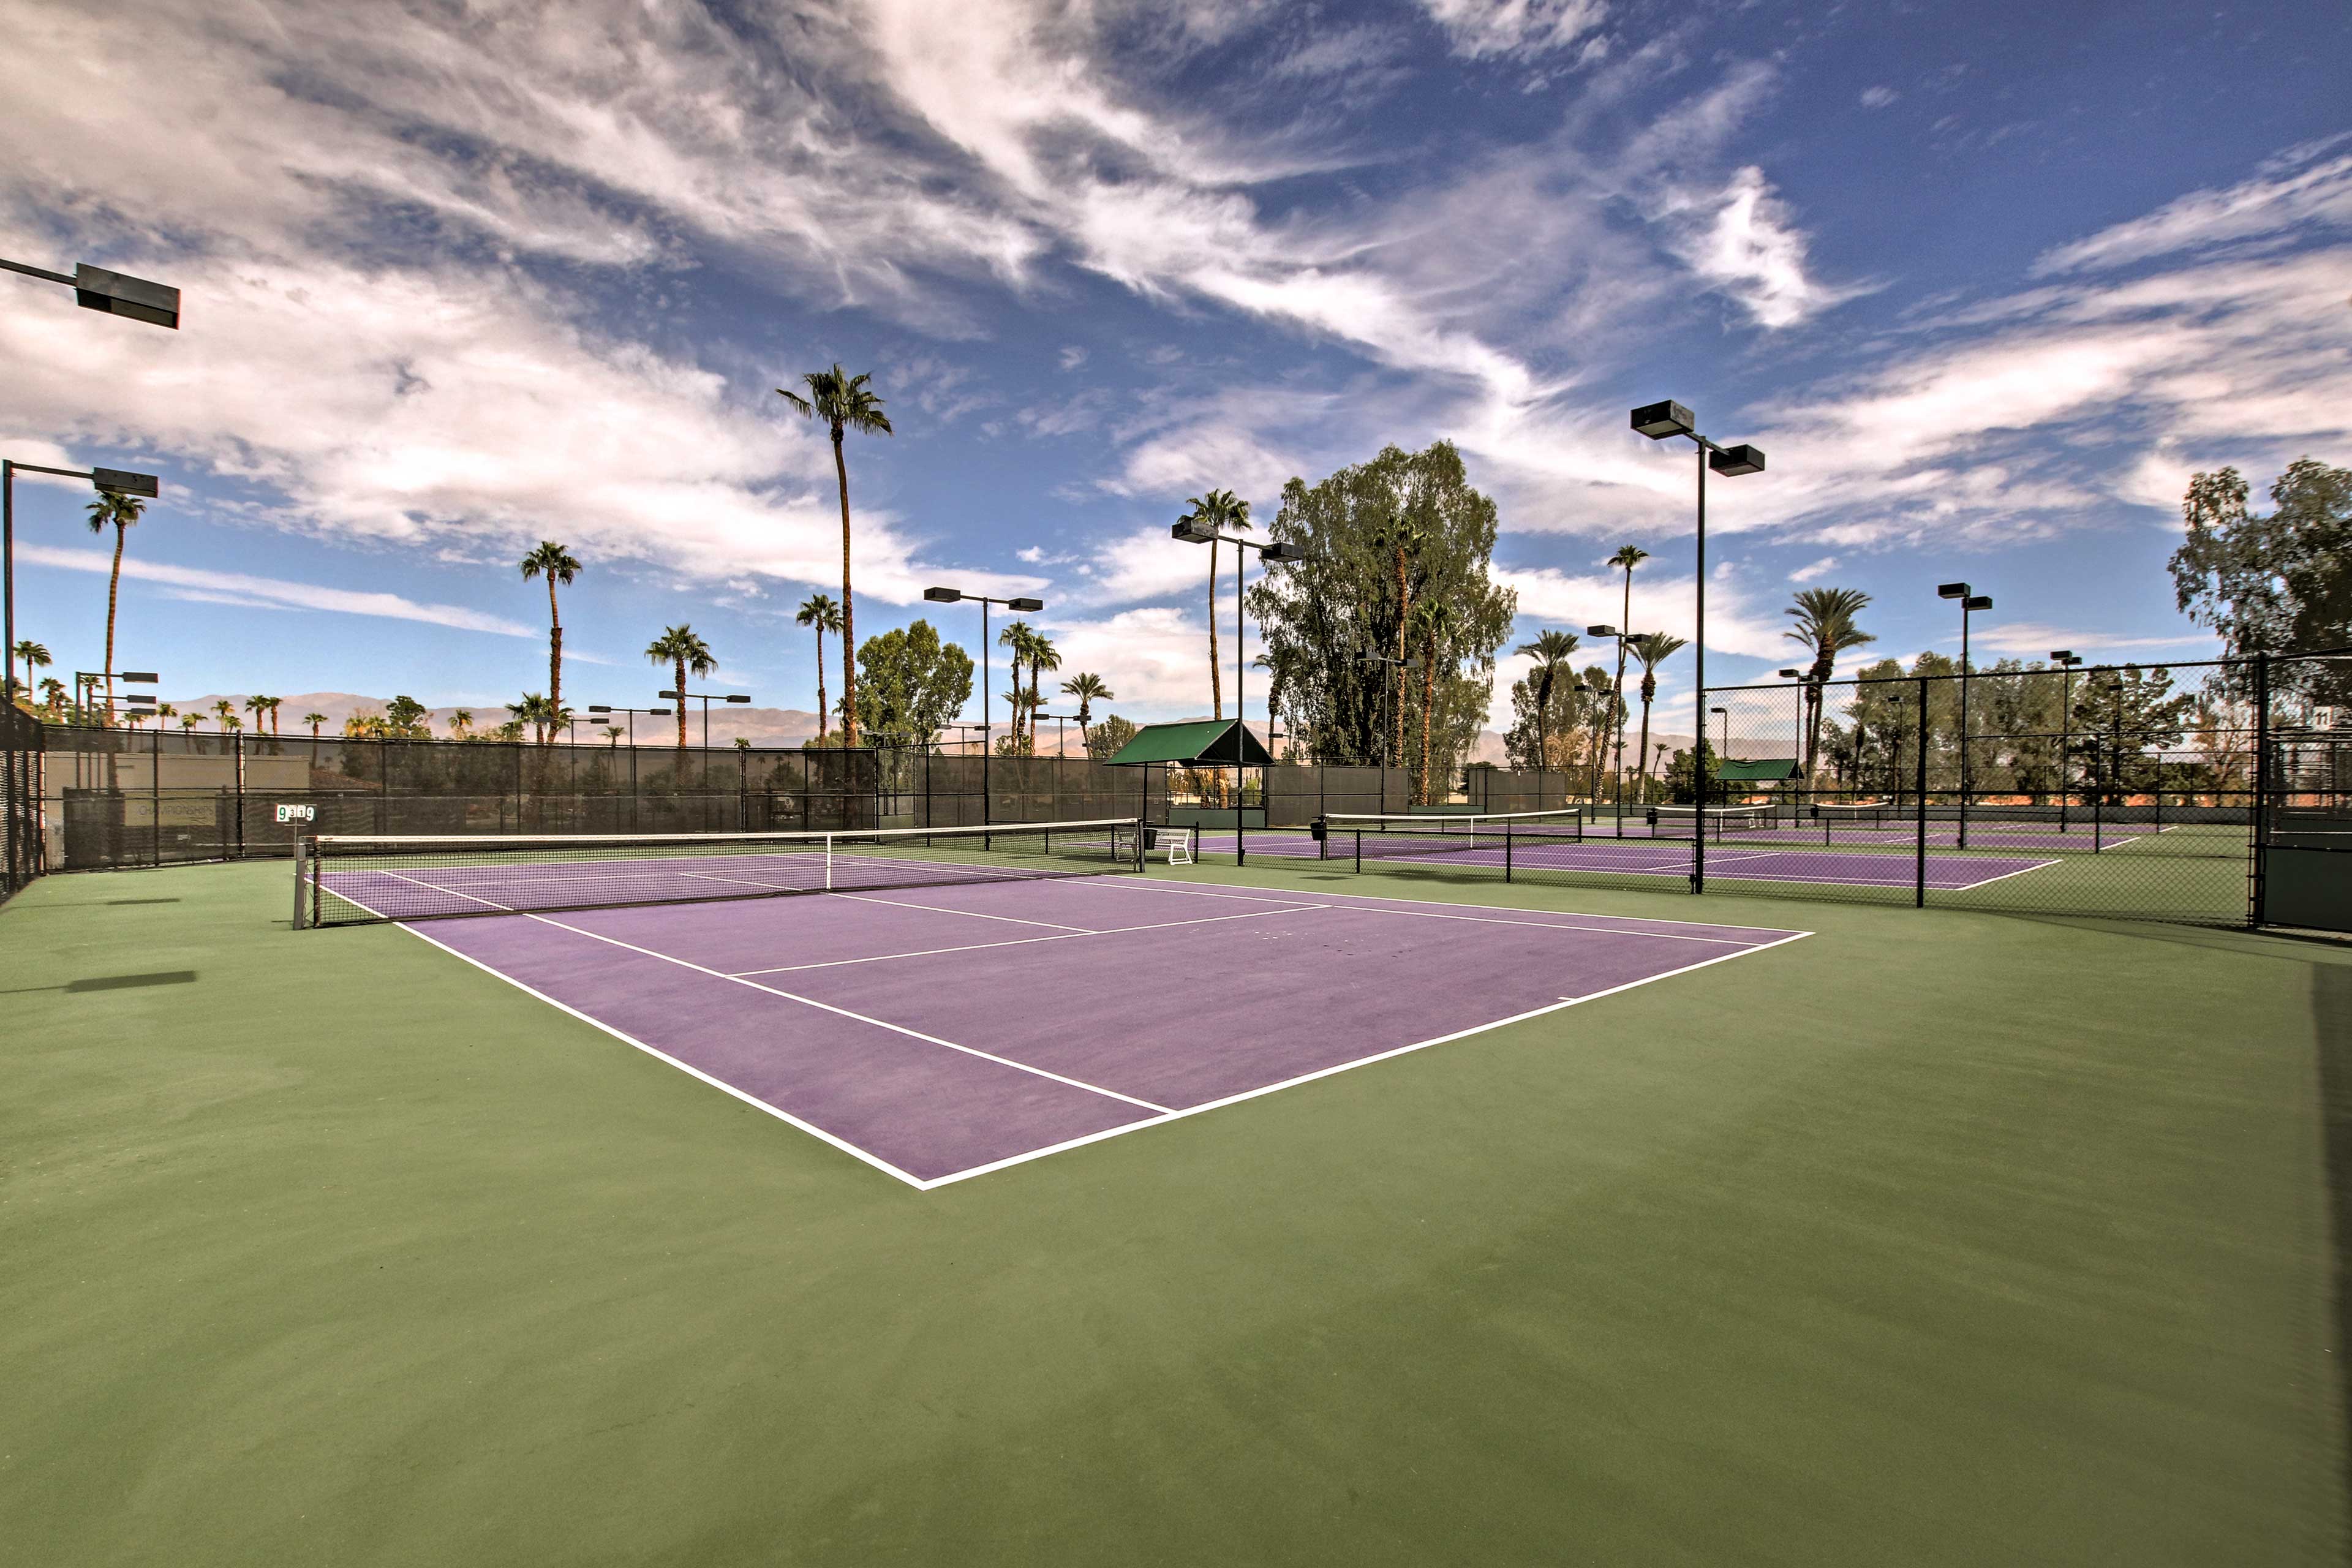 Tennis Courts & Pickleball Courts (Available w/ Fee)